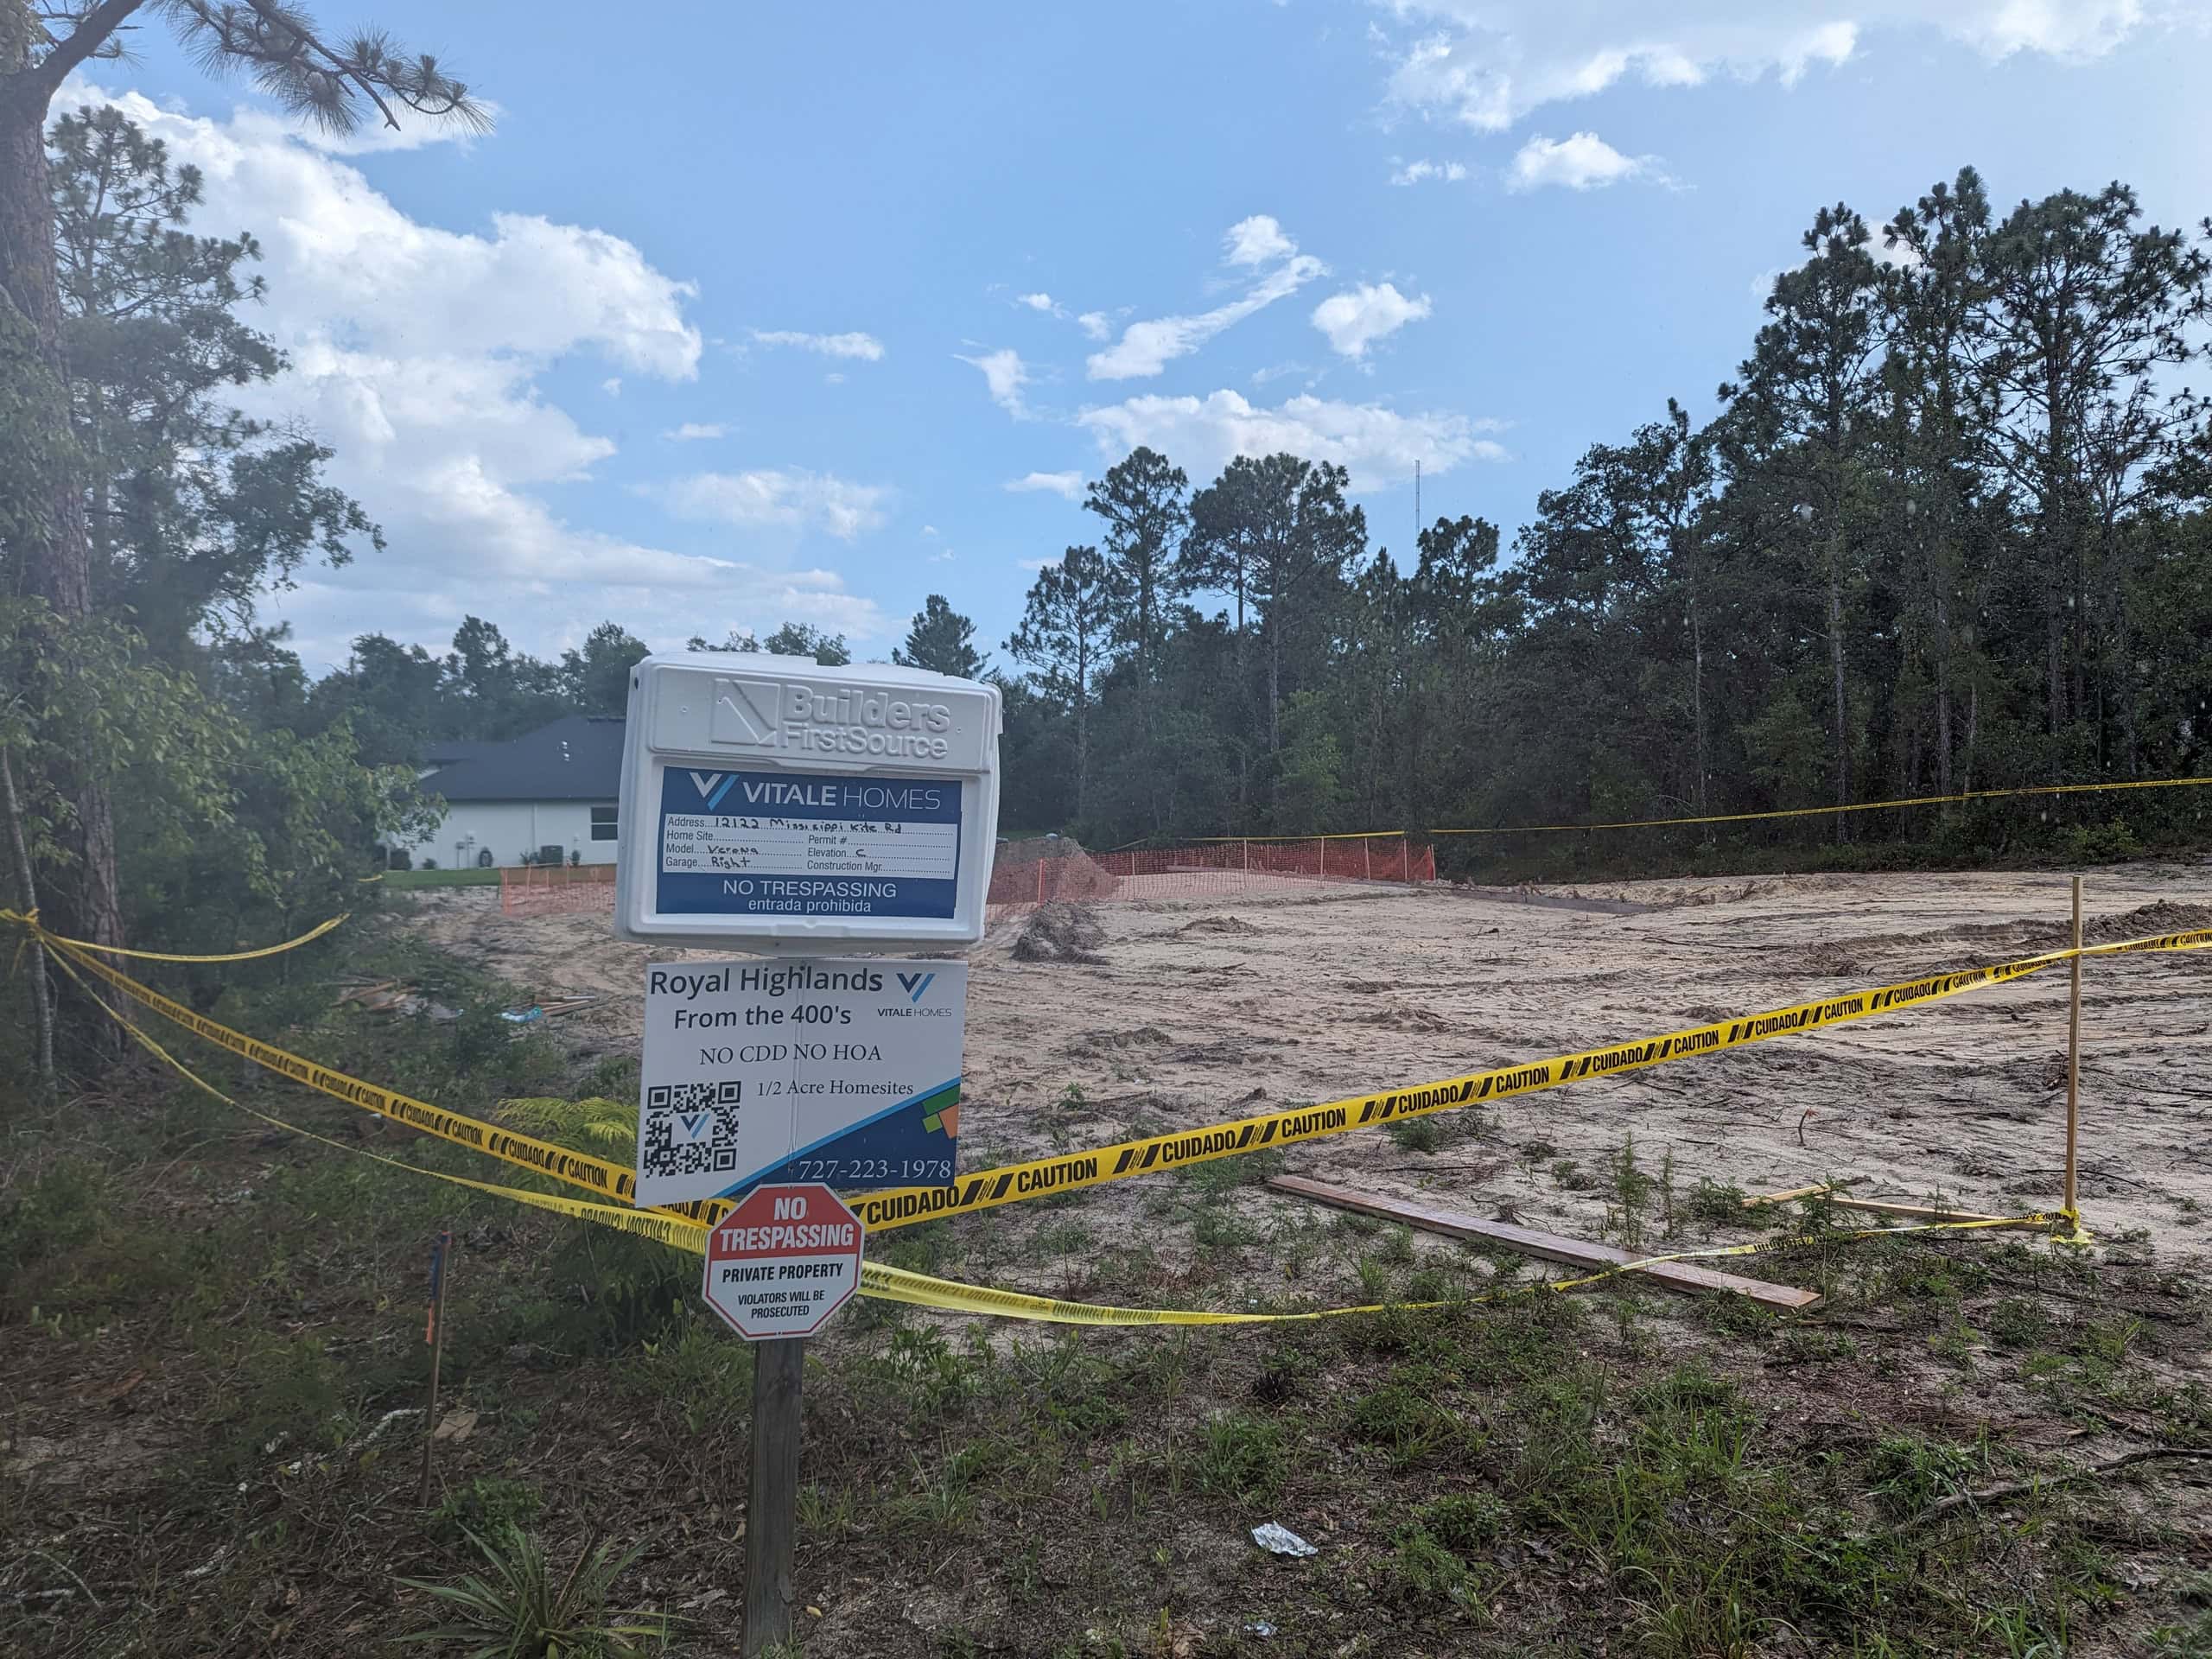 Vitale Homes permit box where they were building the Verona model home until a sinkhole formed last week. [Photo by Julie Maglio]